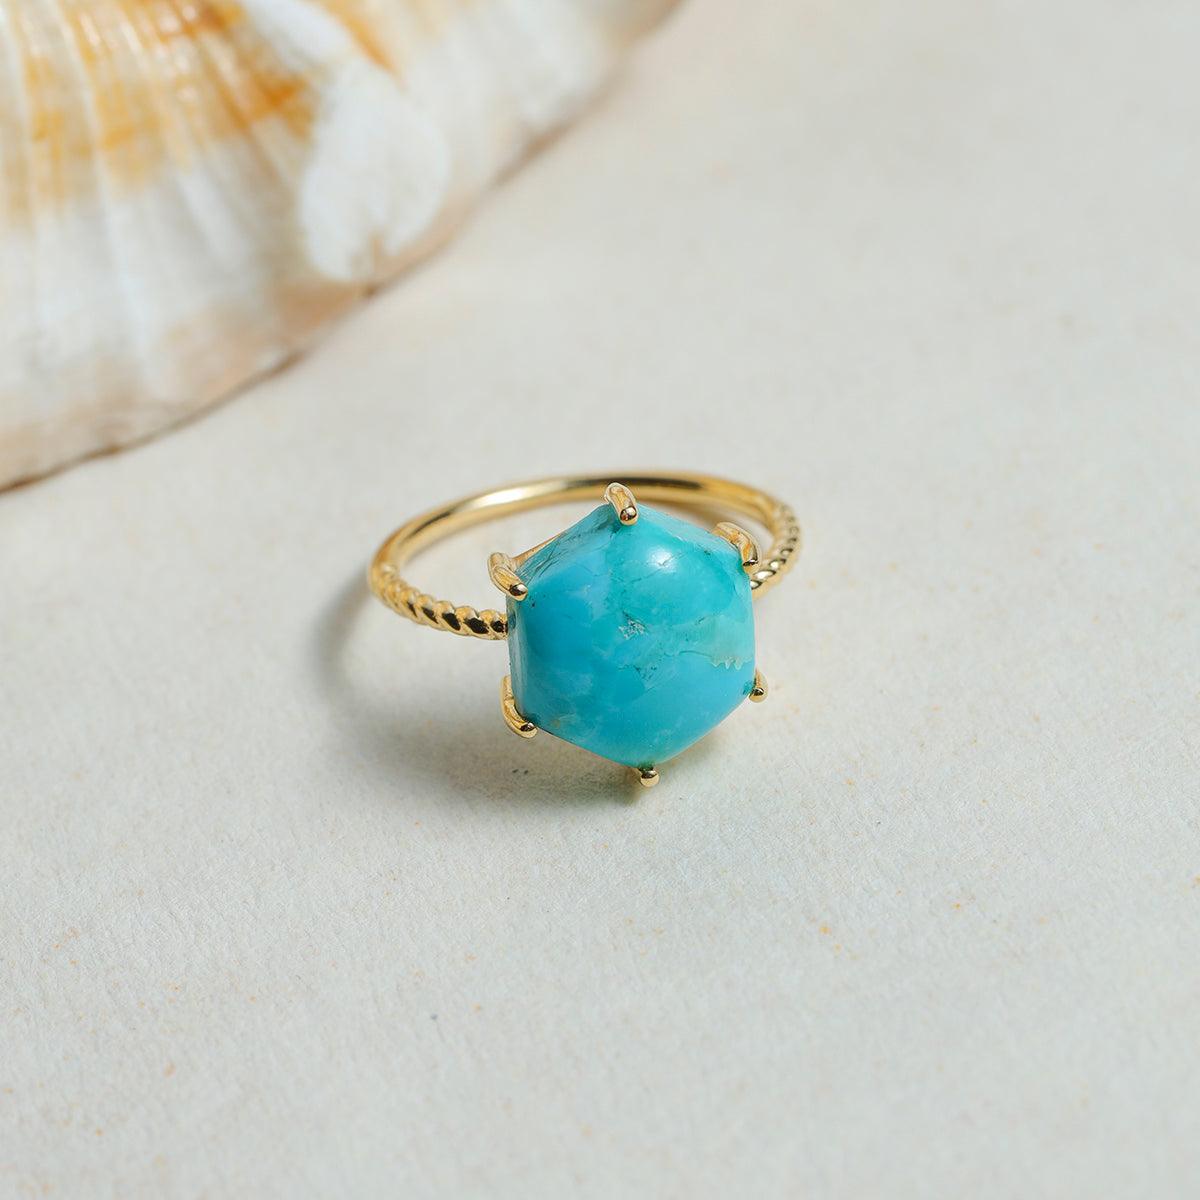 Blue Mohave Turquoise Solitaire Ring 14k Gold Over 925 Silver - YoTreasure